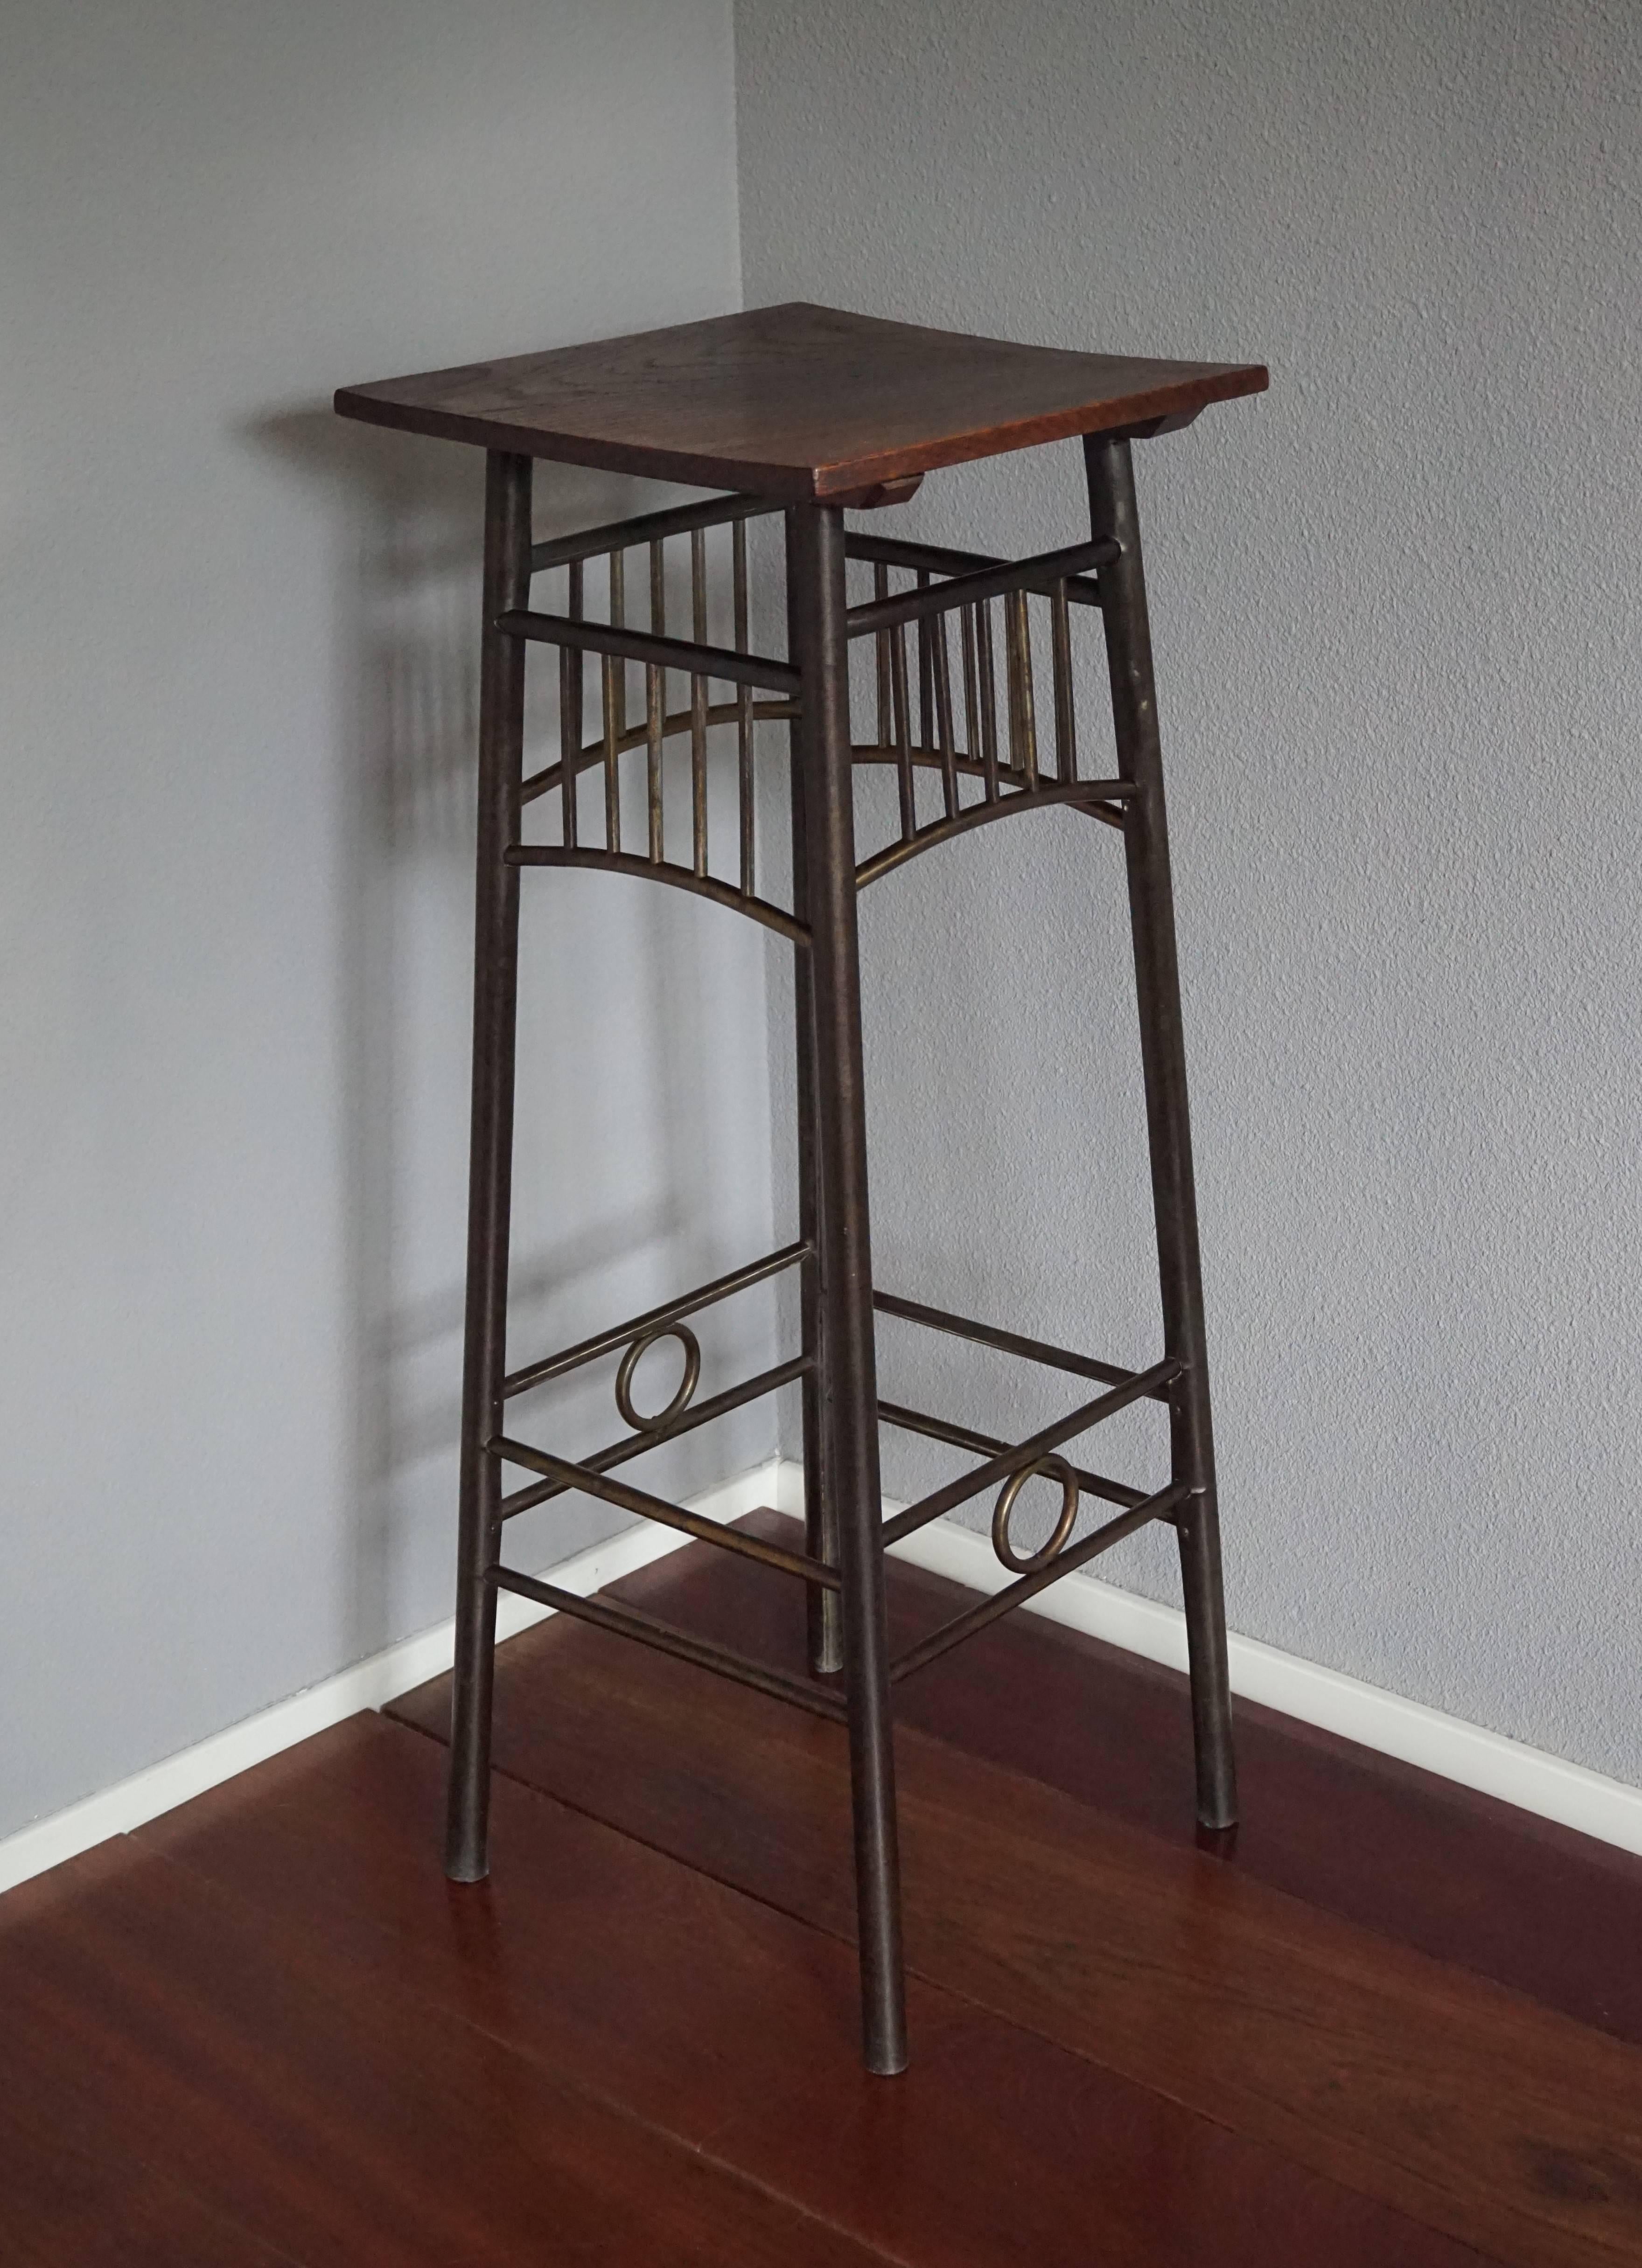 Vienna Secession Viennese Secession Brass Plant Stand with Solid Oak Top Kolomon Moser Style For Sale